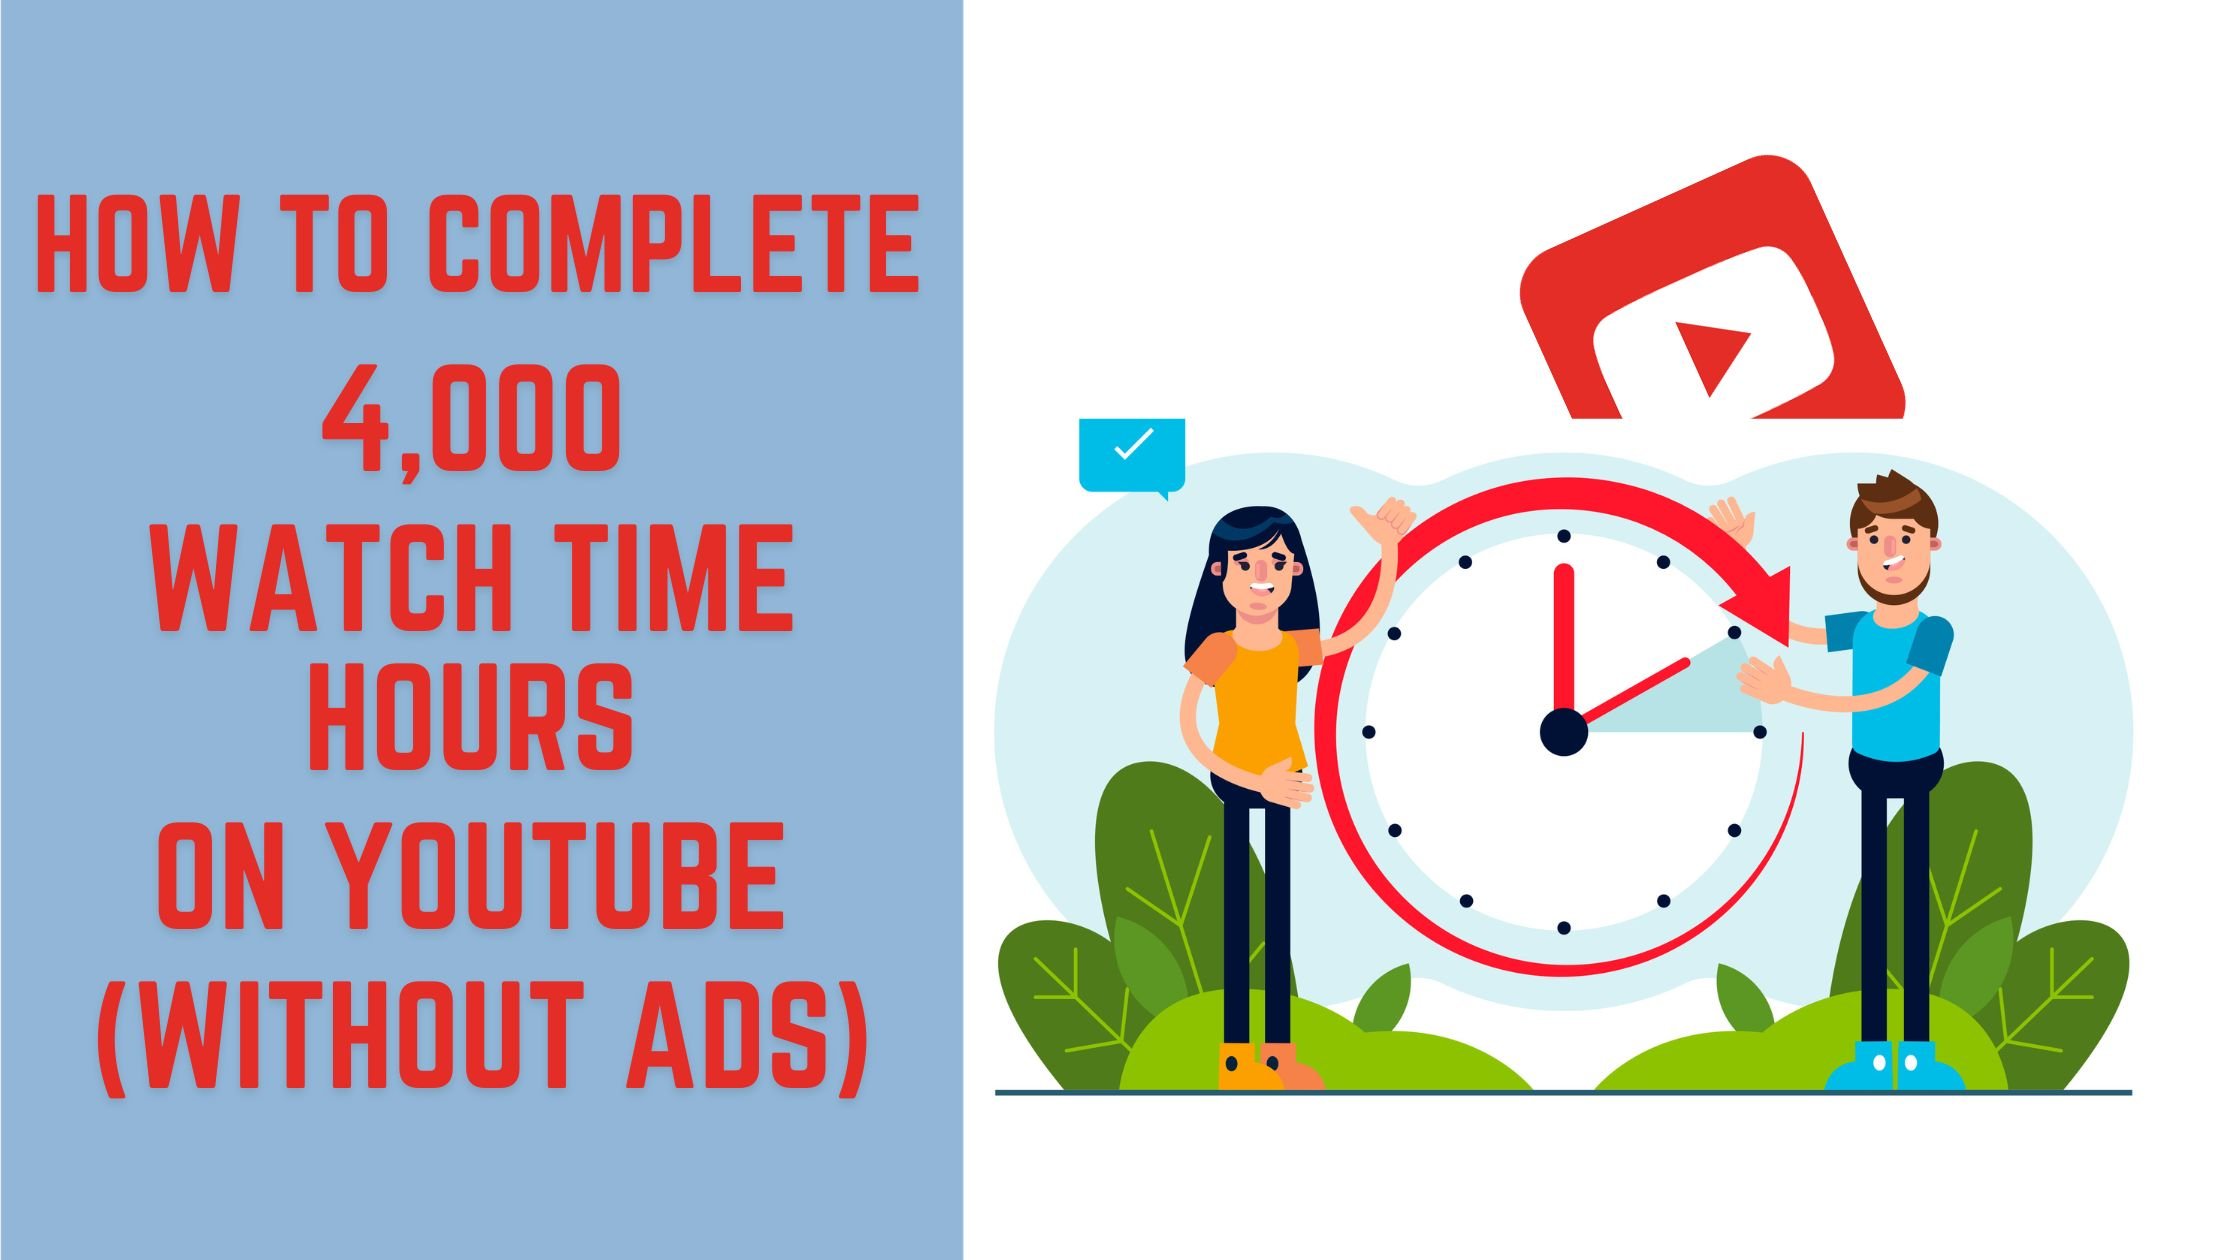 How to complete 4,000 watch time hours on YouTube (without ads)